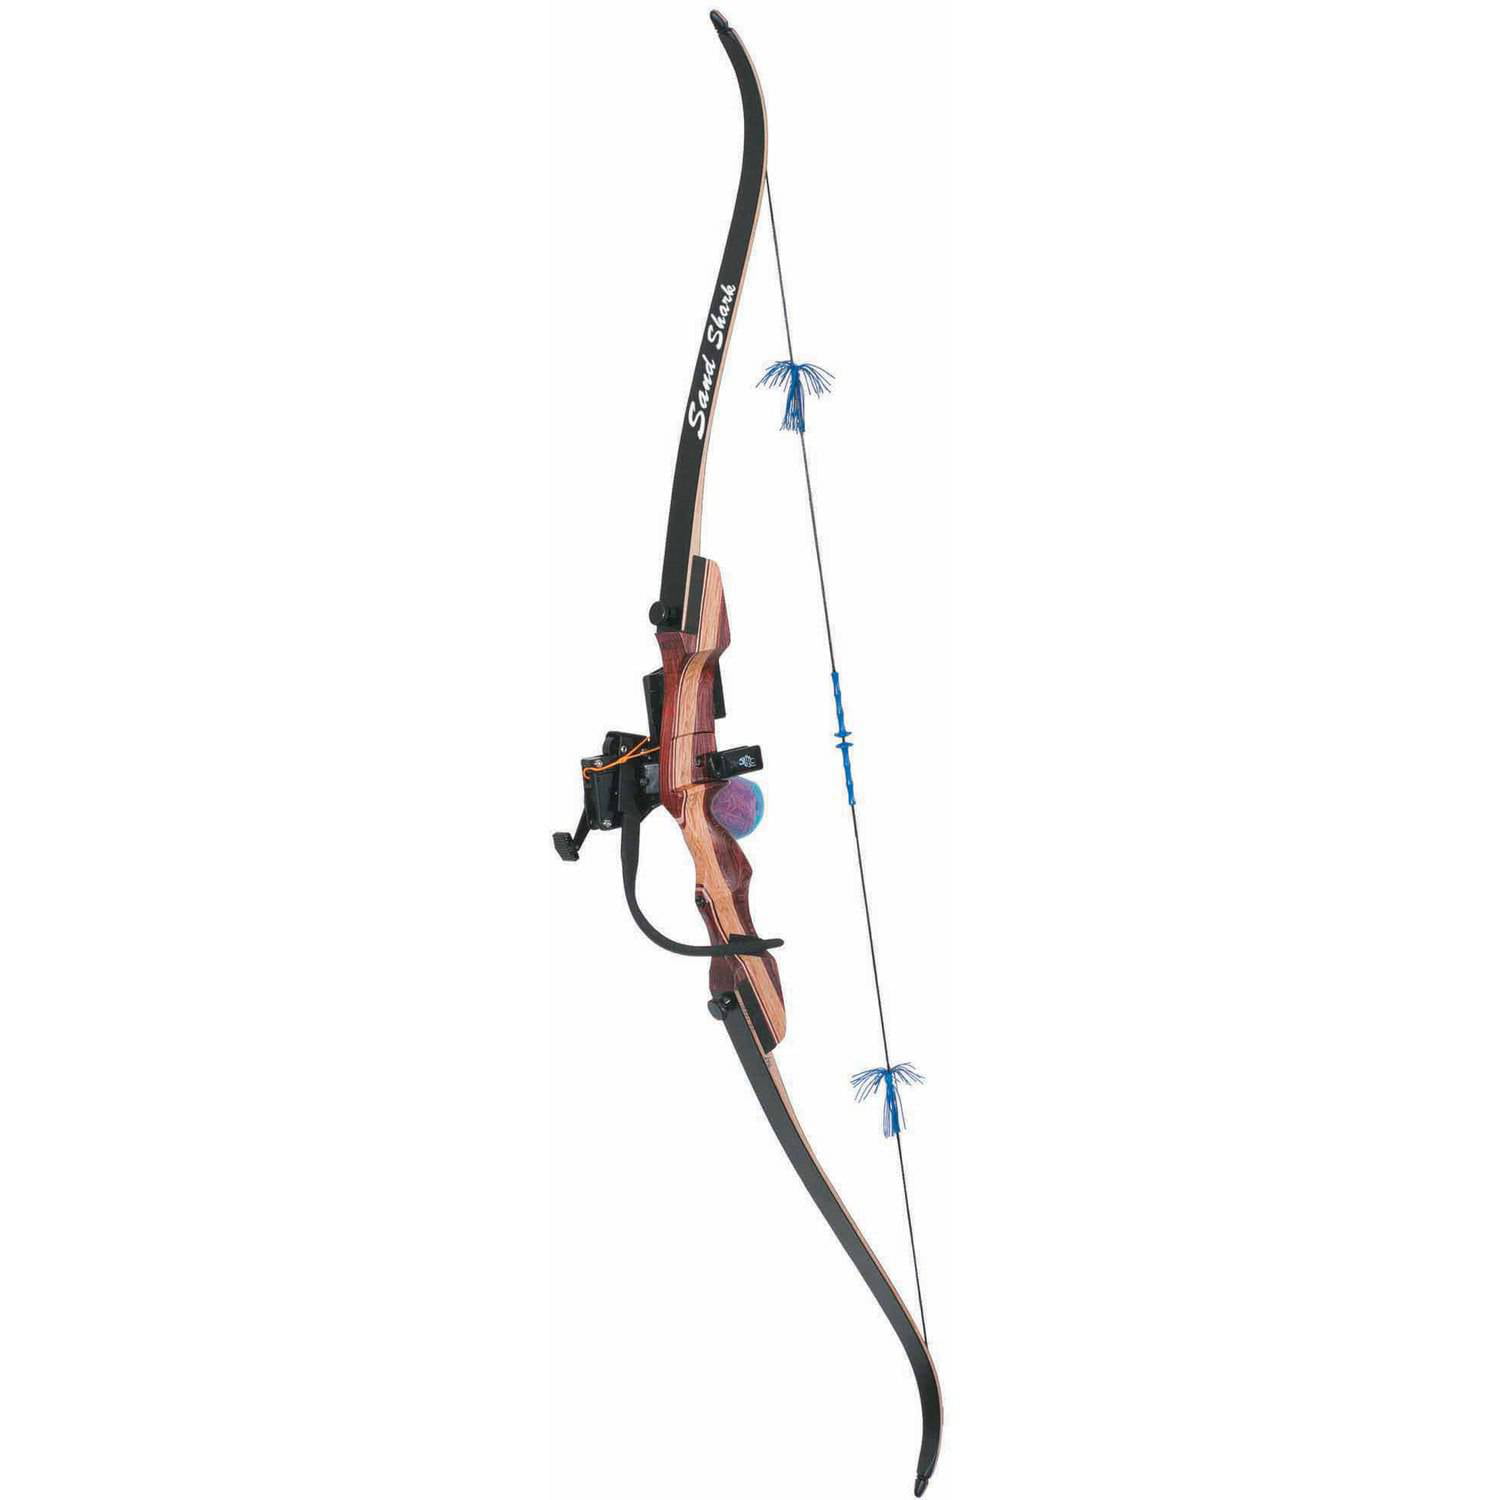 Sand Shark Recurve Bowfishing Bow with Retriever Package by Fin